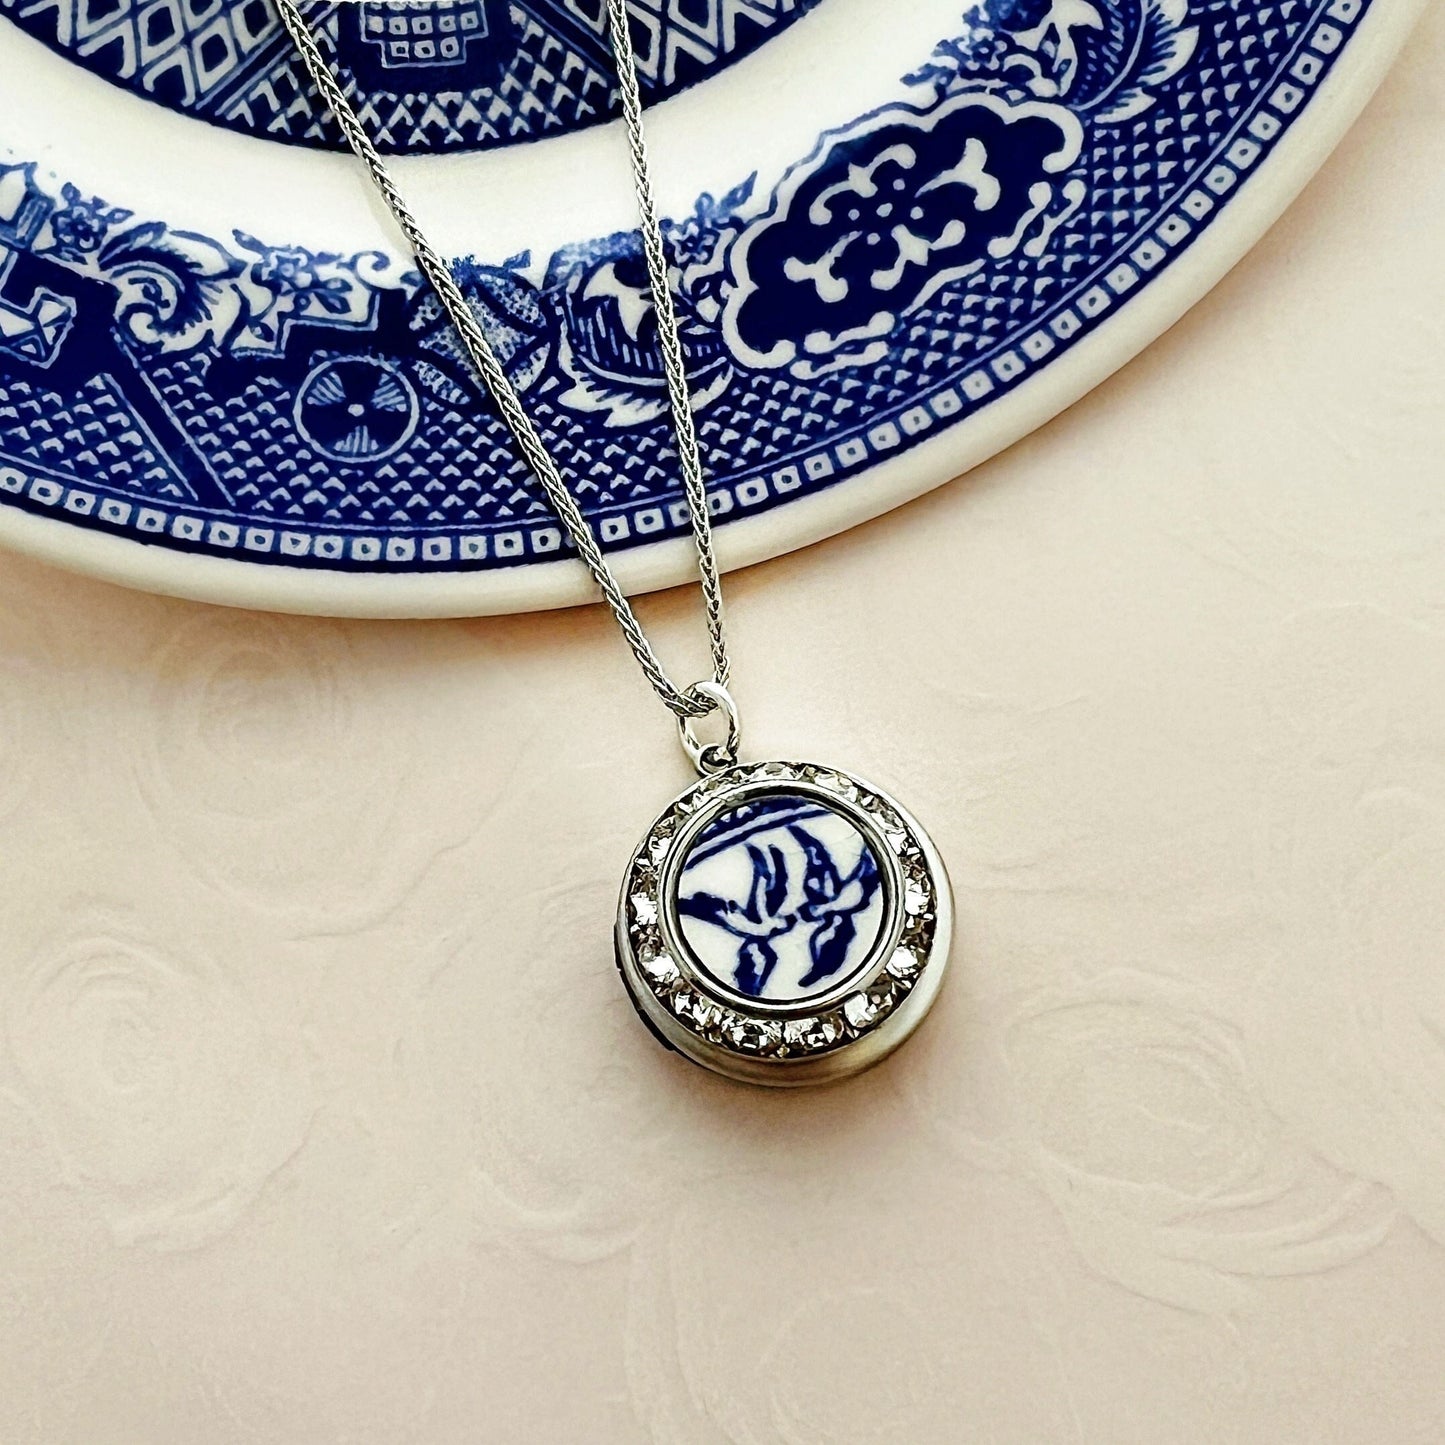 Blue Willow Love Birds Locket Necklace, Anniversary Gifts for Her, Photo Locket, Broken China Jewelry